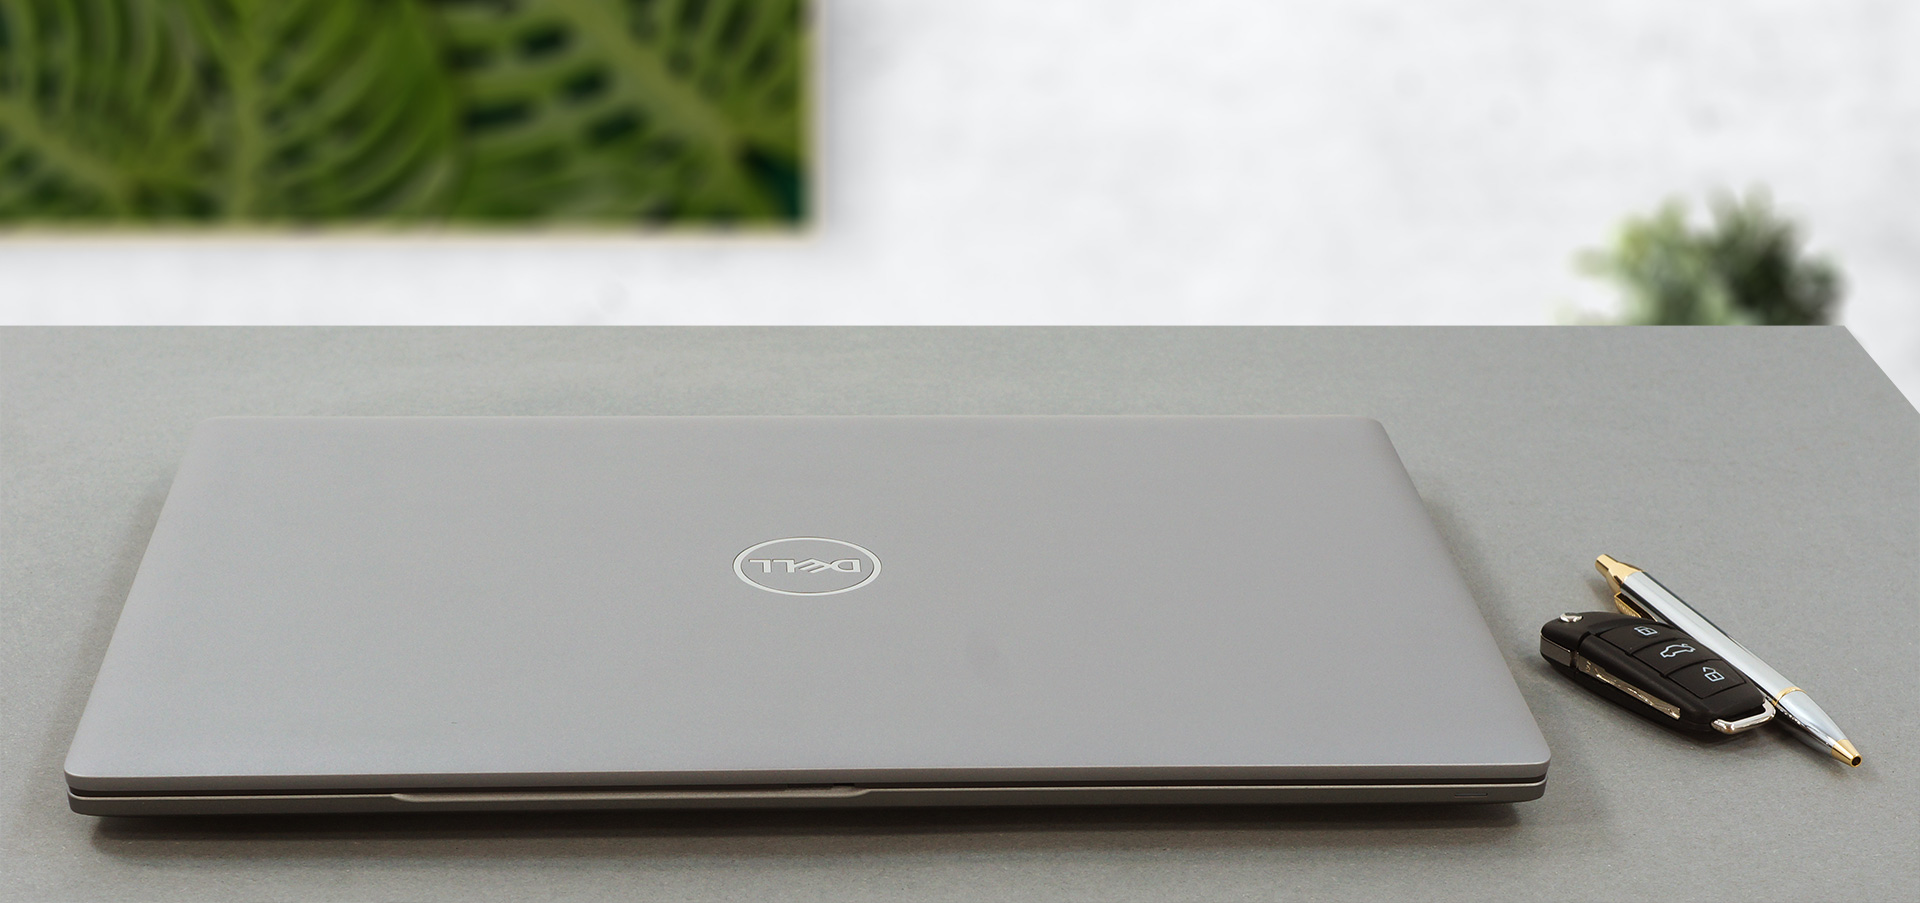 Dell Latitude 15 5520 review - paving the way to sustainability |  